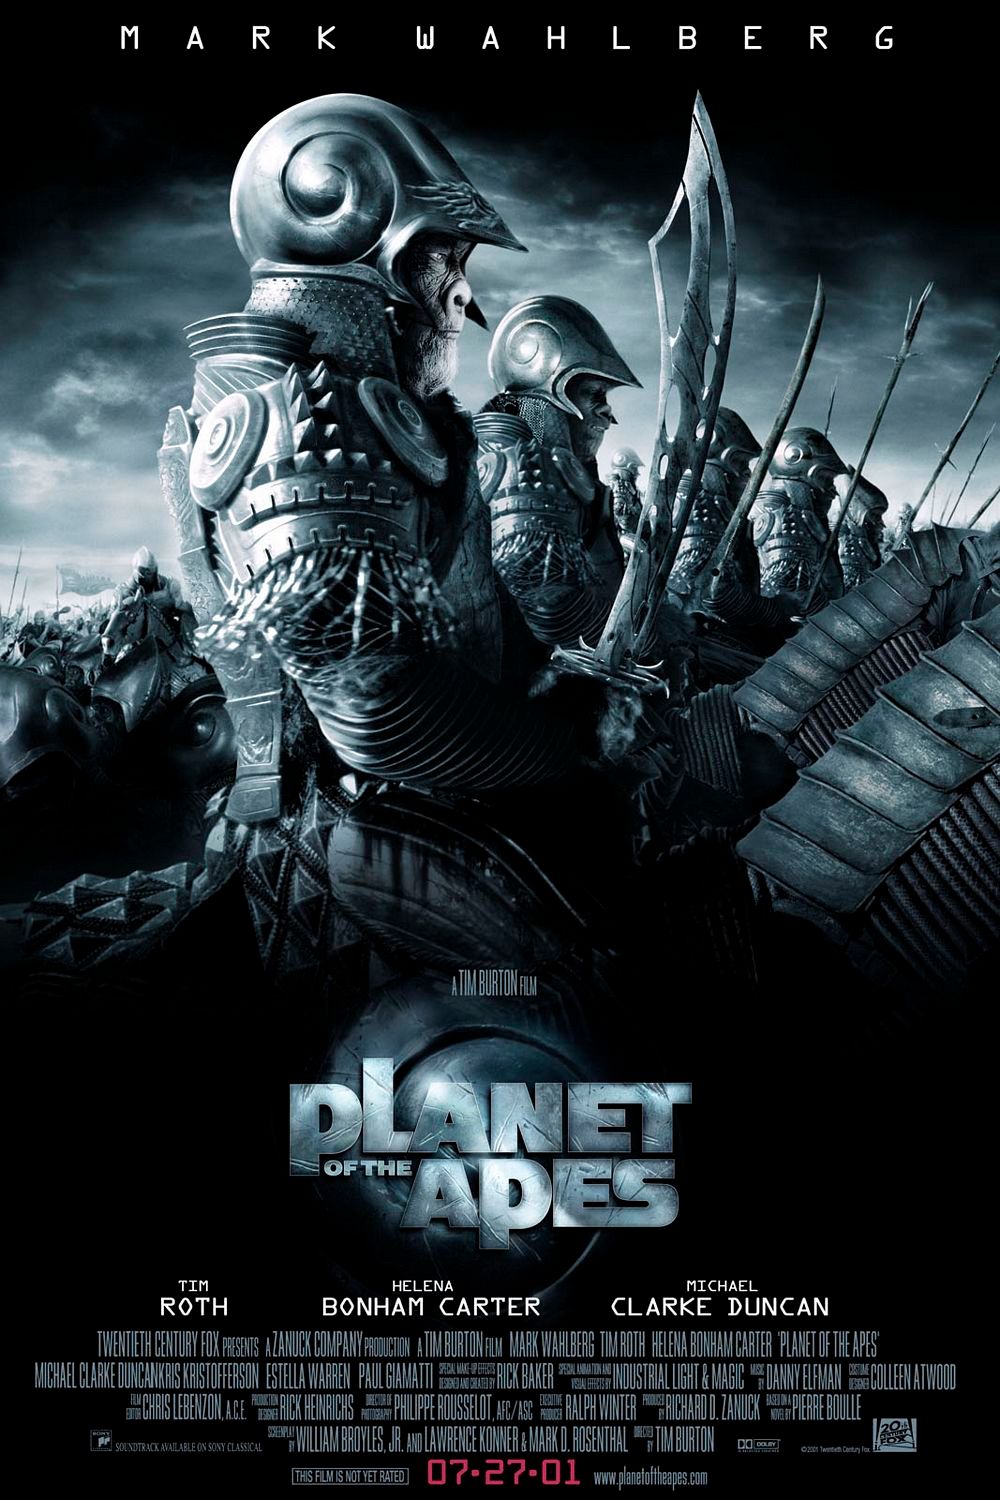 An army of warrior apes with armor, swords, and riding horses on Tim Burton's Planet of the Apes poster